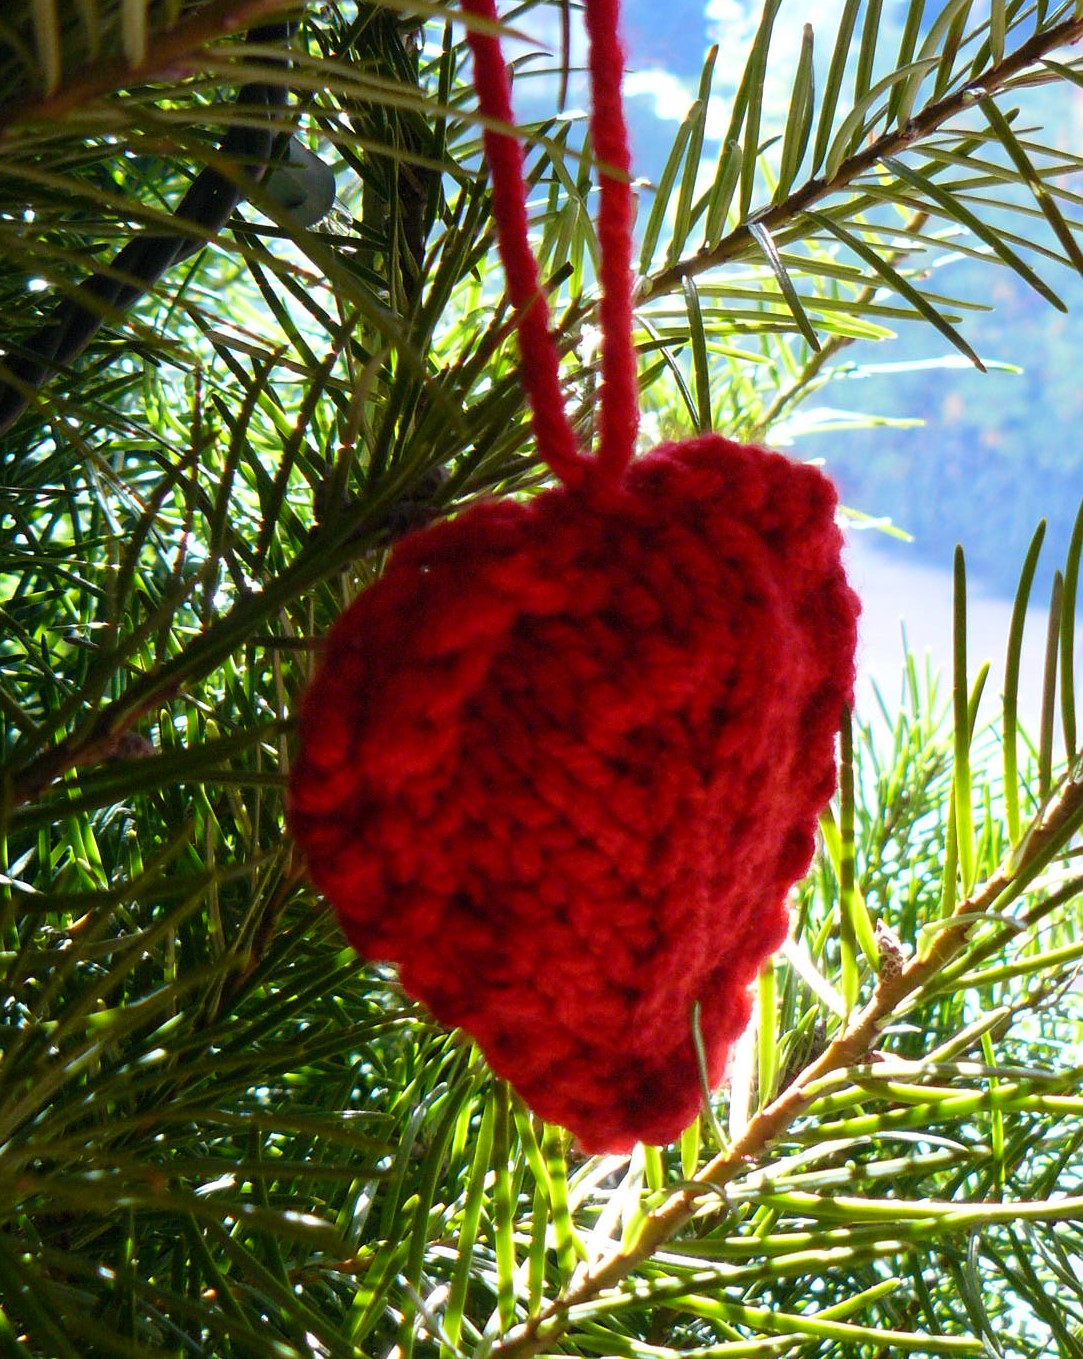 knitted heart hanging on branch